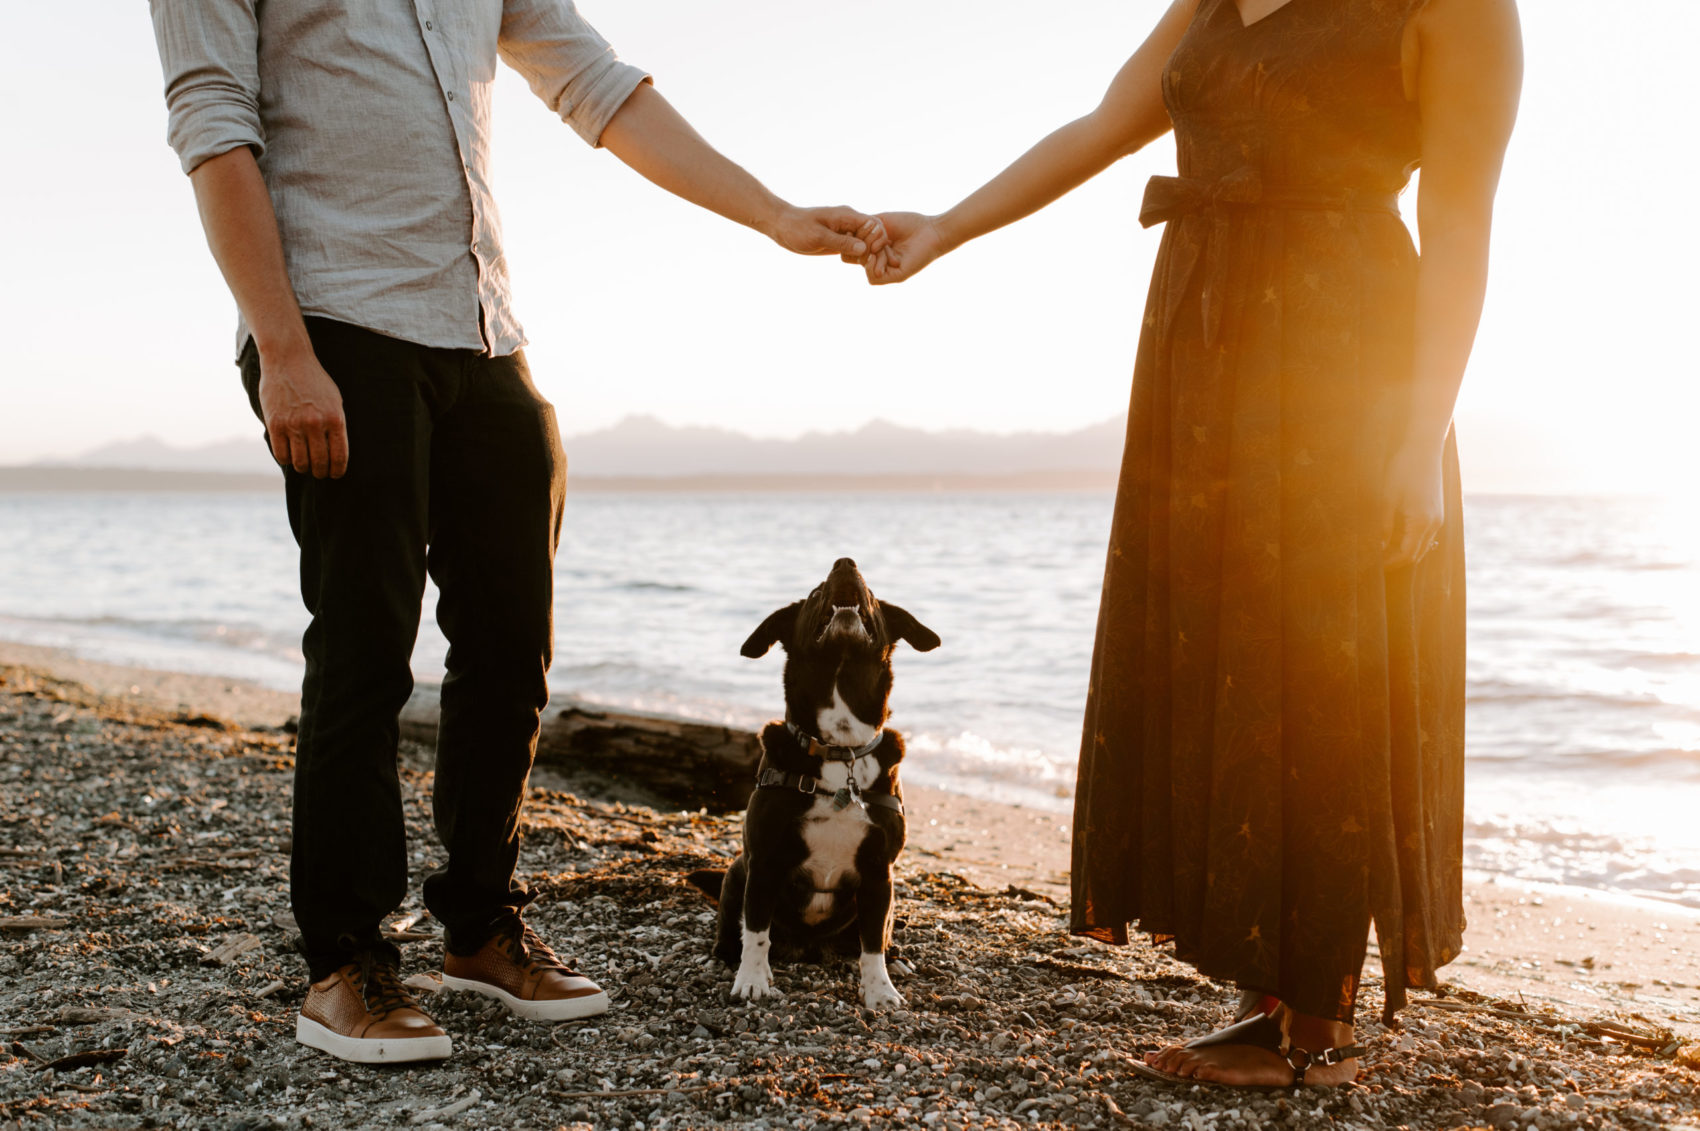 An engagement photo of a couple holding hands with their dog sitting between them on a sunlit beach.